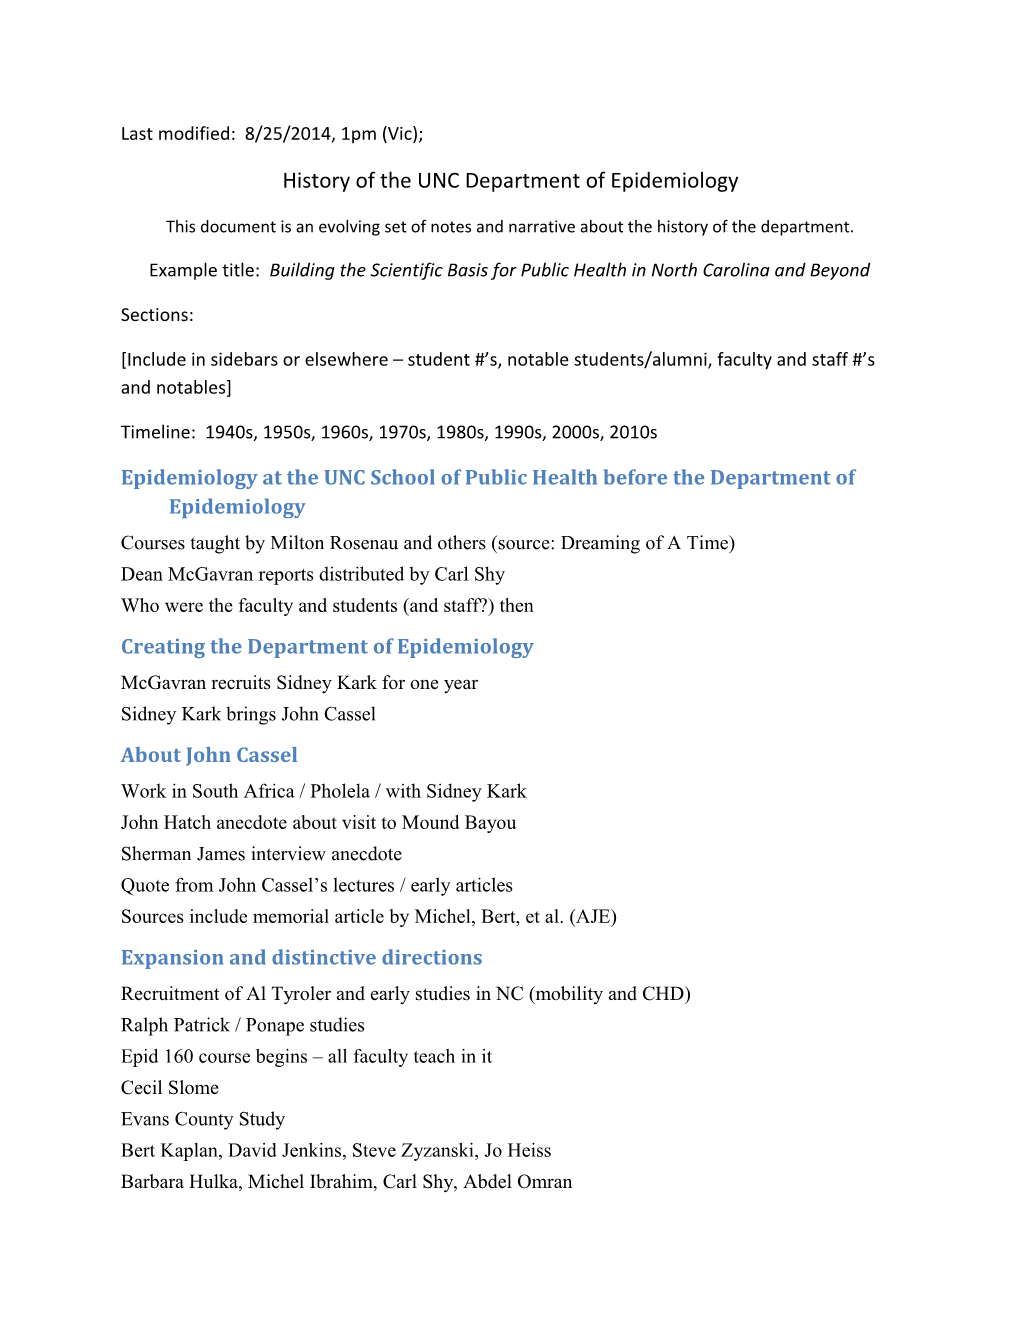 History of the UNC Department of Epidemiology